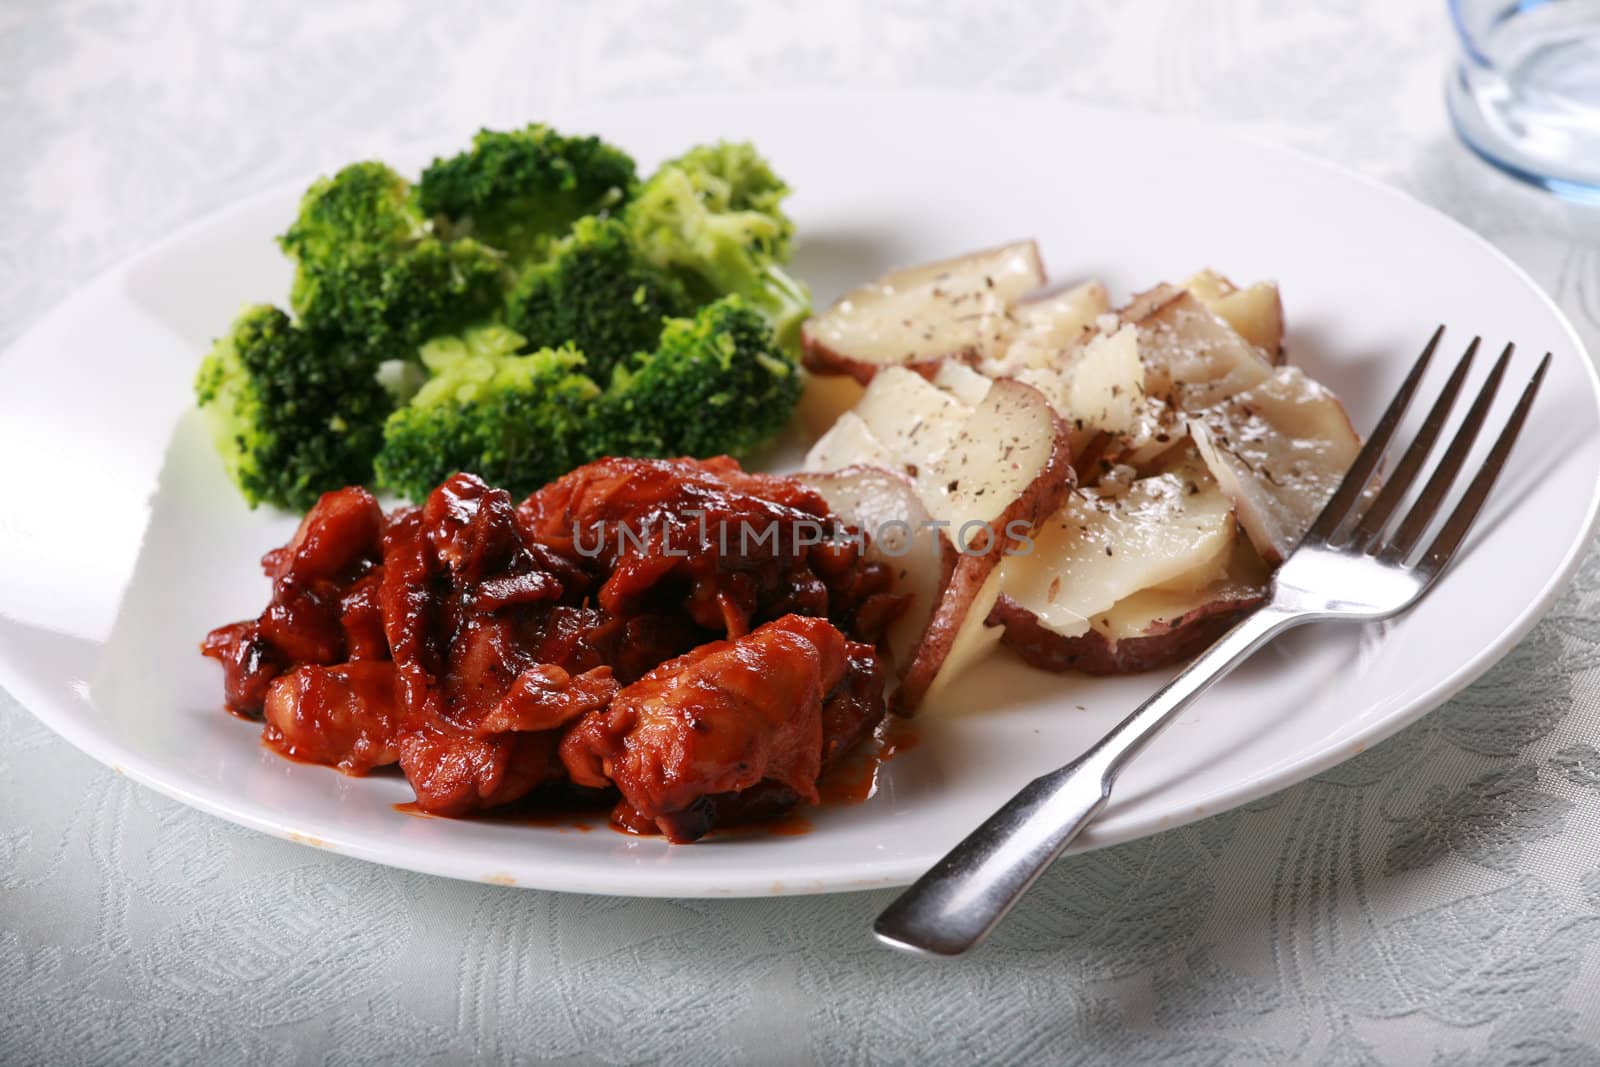 Delicious barbecue chicken meal with side of broccoli and potatoes